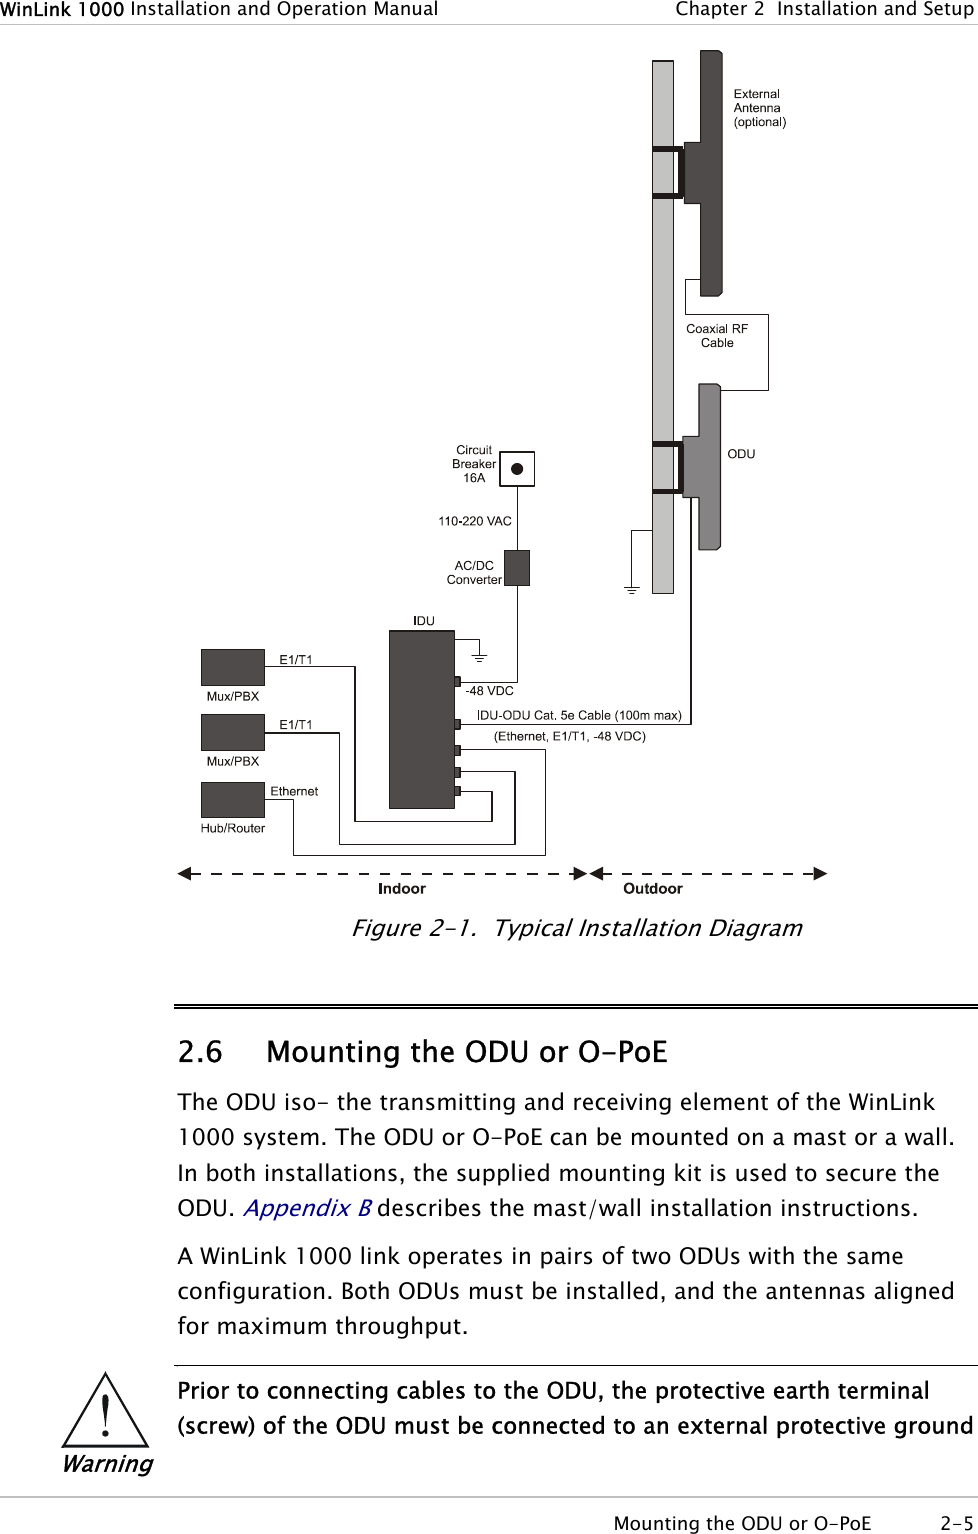 WinLink 1000 Installation and Operation Manual  Chapter  2  Installation and Setup  Figure  2-1.  Typical Installation Diagram 2.6 Mounting the ODU or O-PoE The ODU iso- the transmitting and receiving element of the WinLink 1000 system. The ODU or O-PoE can be mounted on a mast or a wall. In both installations, the supplied mounting kit is used to secure the ODU. Appendix B describes the mast/wall installation instructions. A WinLink 1000 link operates in pairs of two ODUs with the same configuration. Both ODUs must be installed, and the antennas aligned for maximum throughput. •  Prior to connecting cables to the ODU, the protective earth terminal (screw) of the ODU must be connected to an external protective ground Warning  Mounting the ODU or O-PoE  2-5 